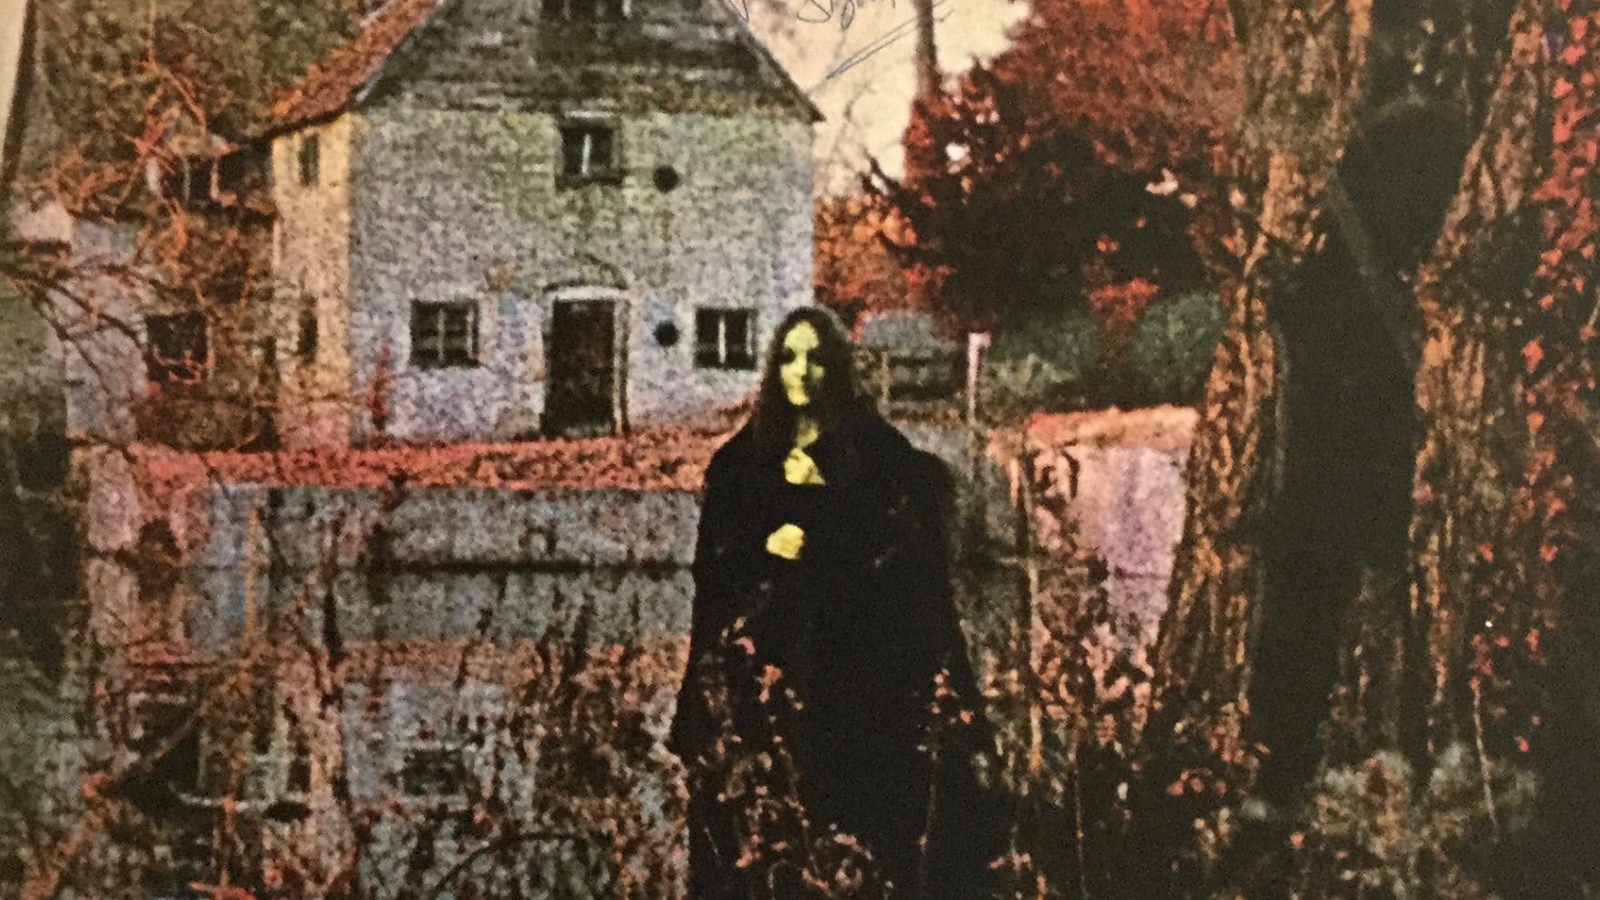 Black Sabbath's Debut: Woman From Album Cover Makes Electronic Music Today